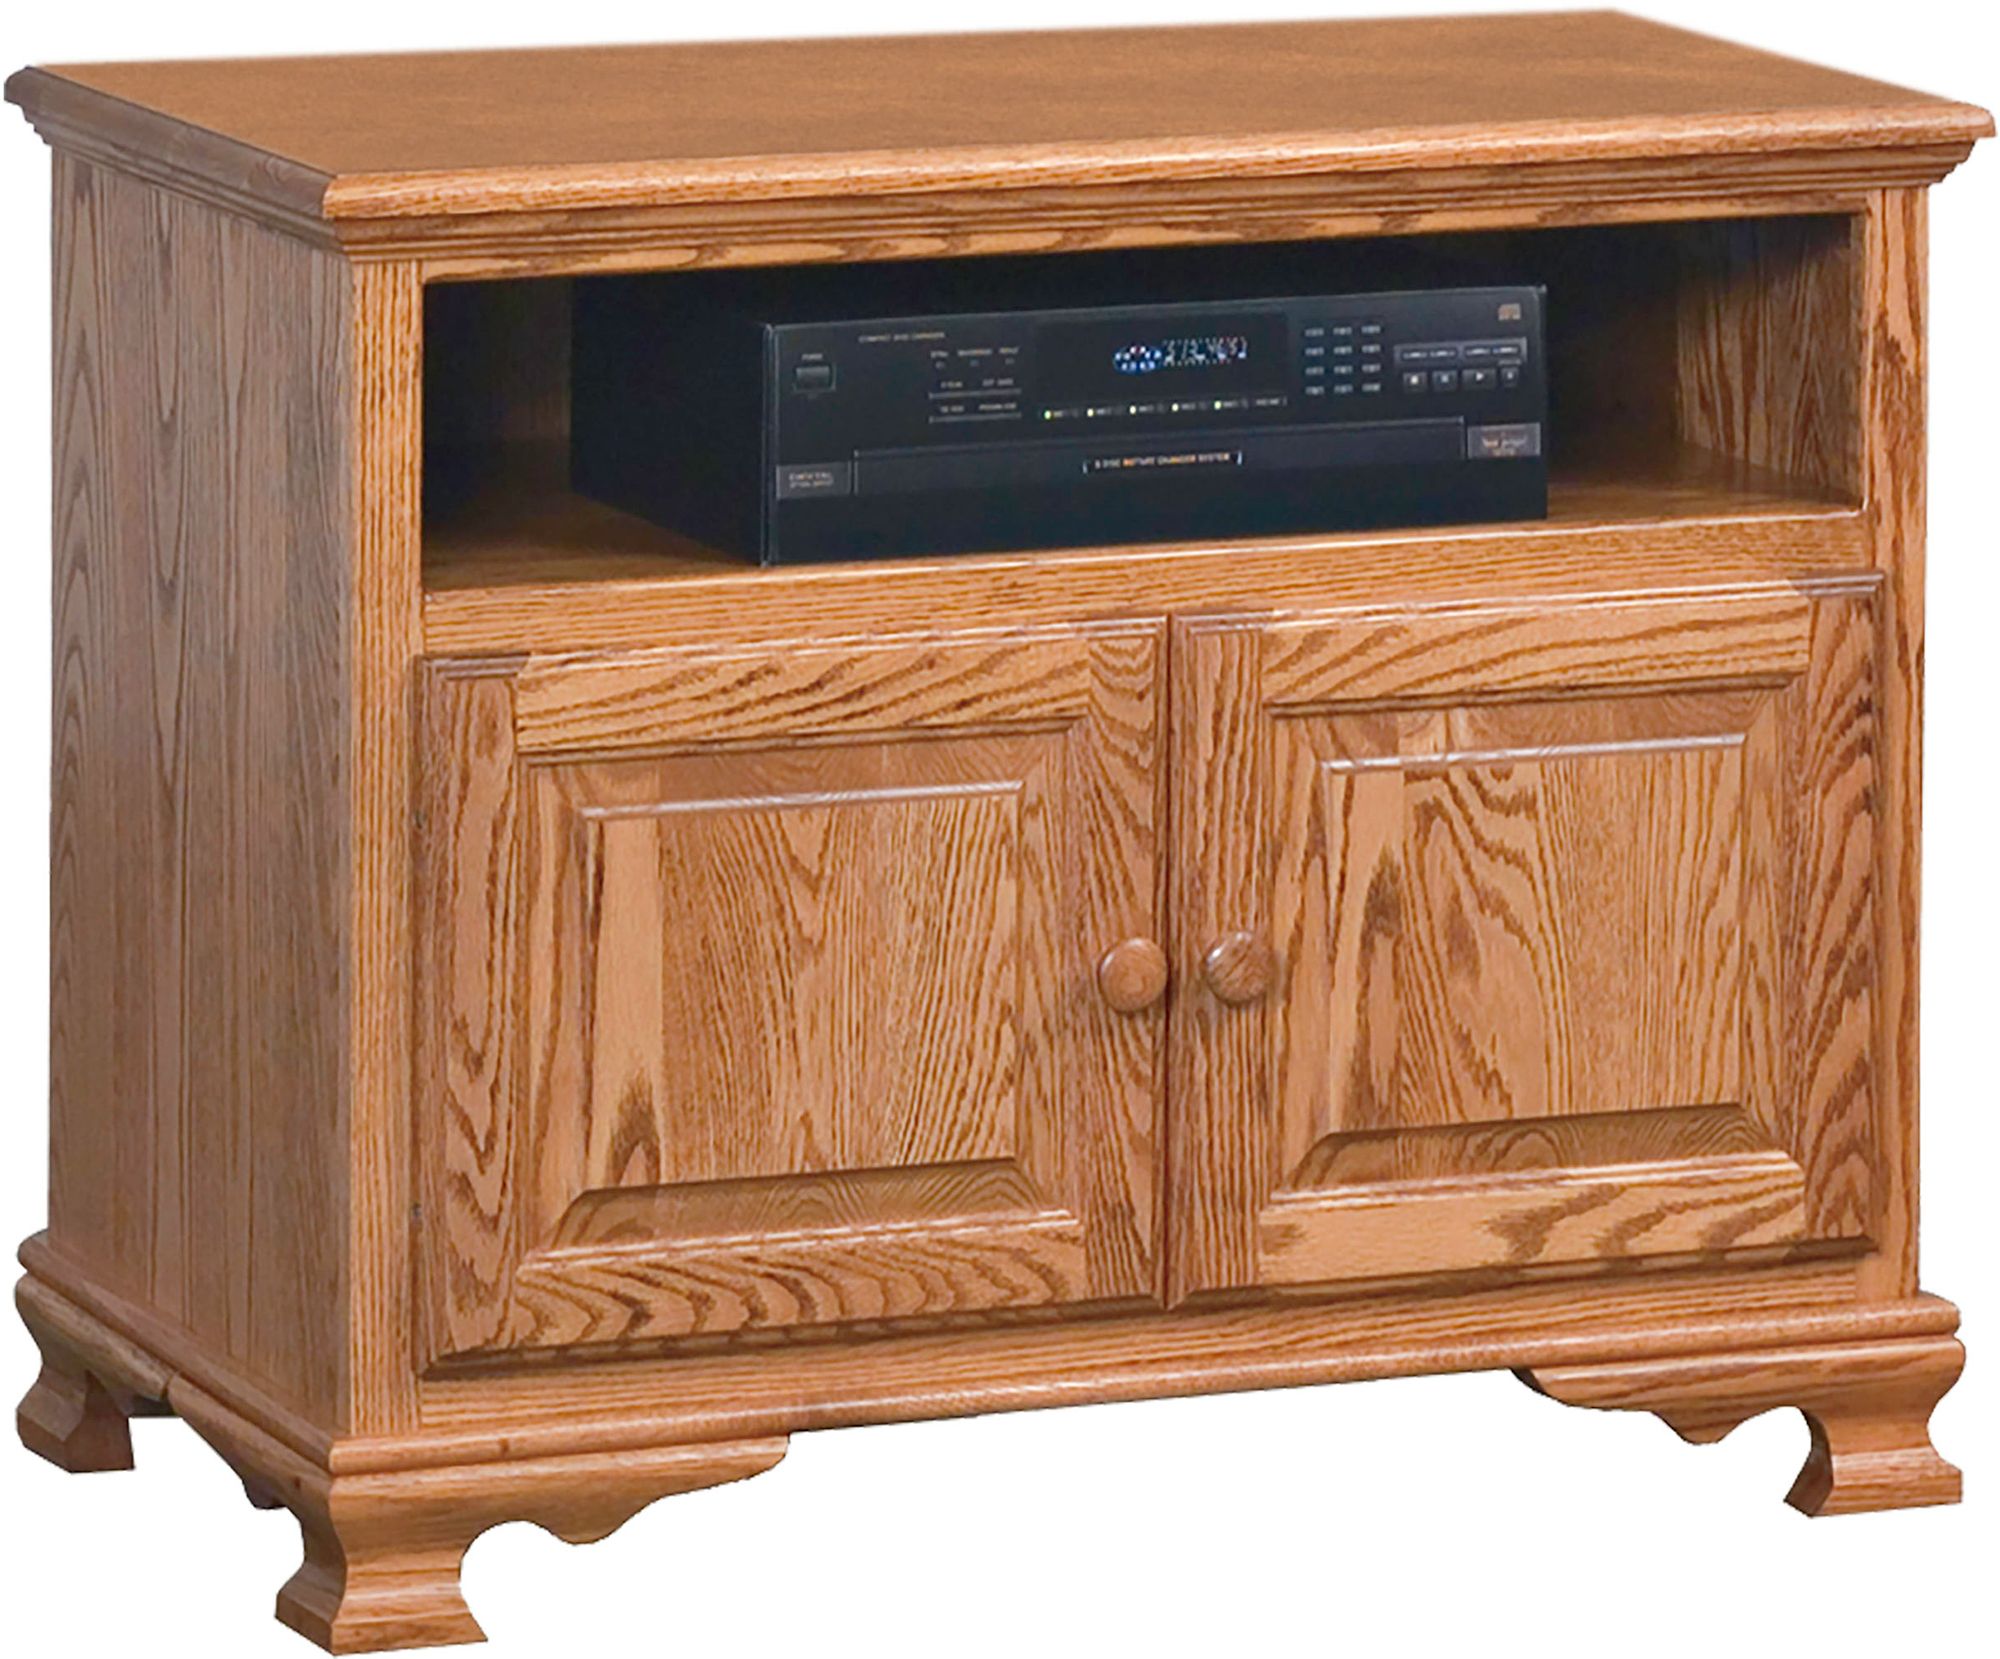 Heritage Small Two Door Tv Stand | Amish Heritage Two Door Within Small Tv Stands (View 9 of 15)